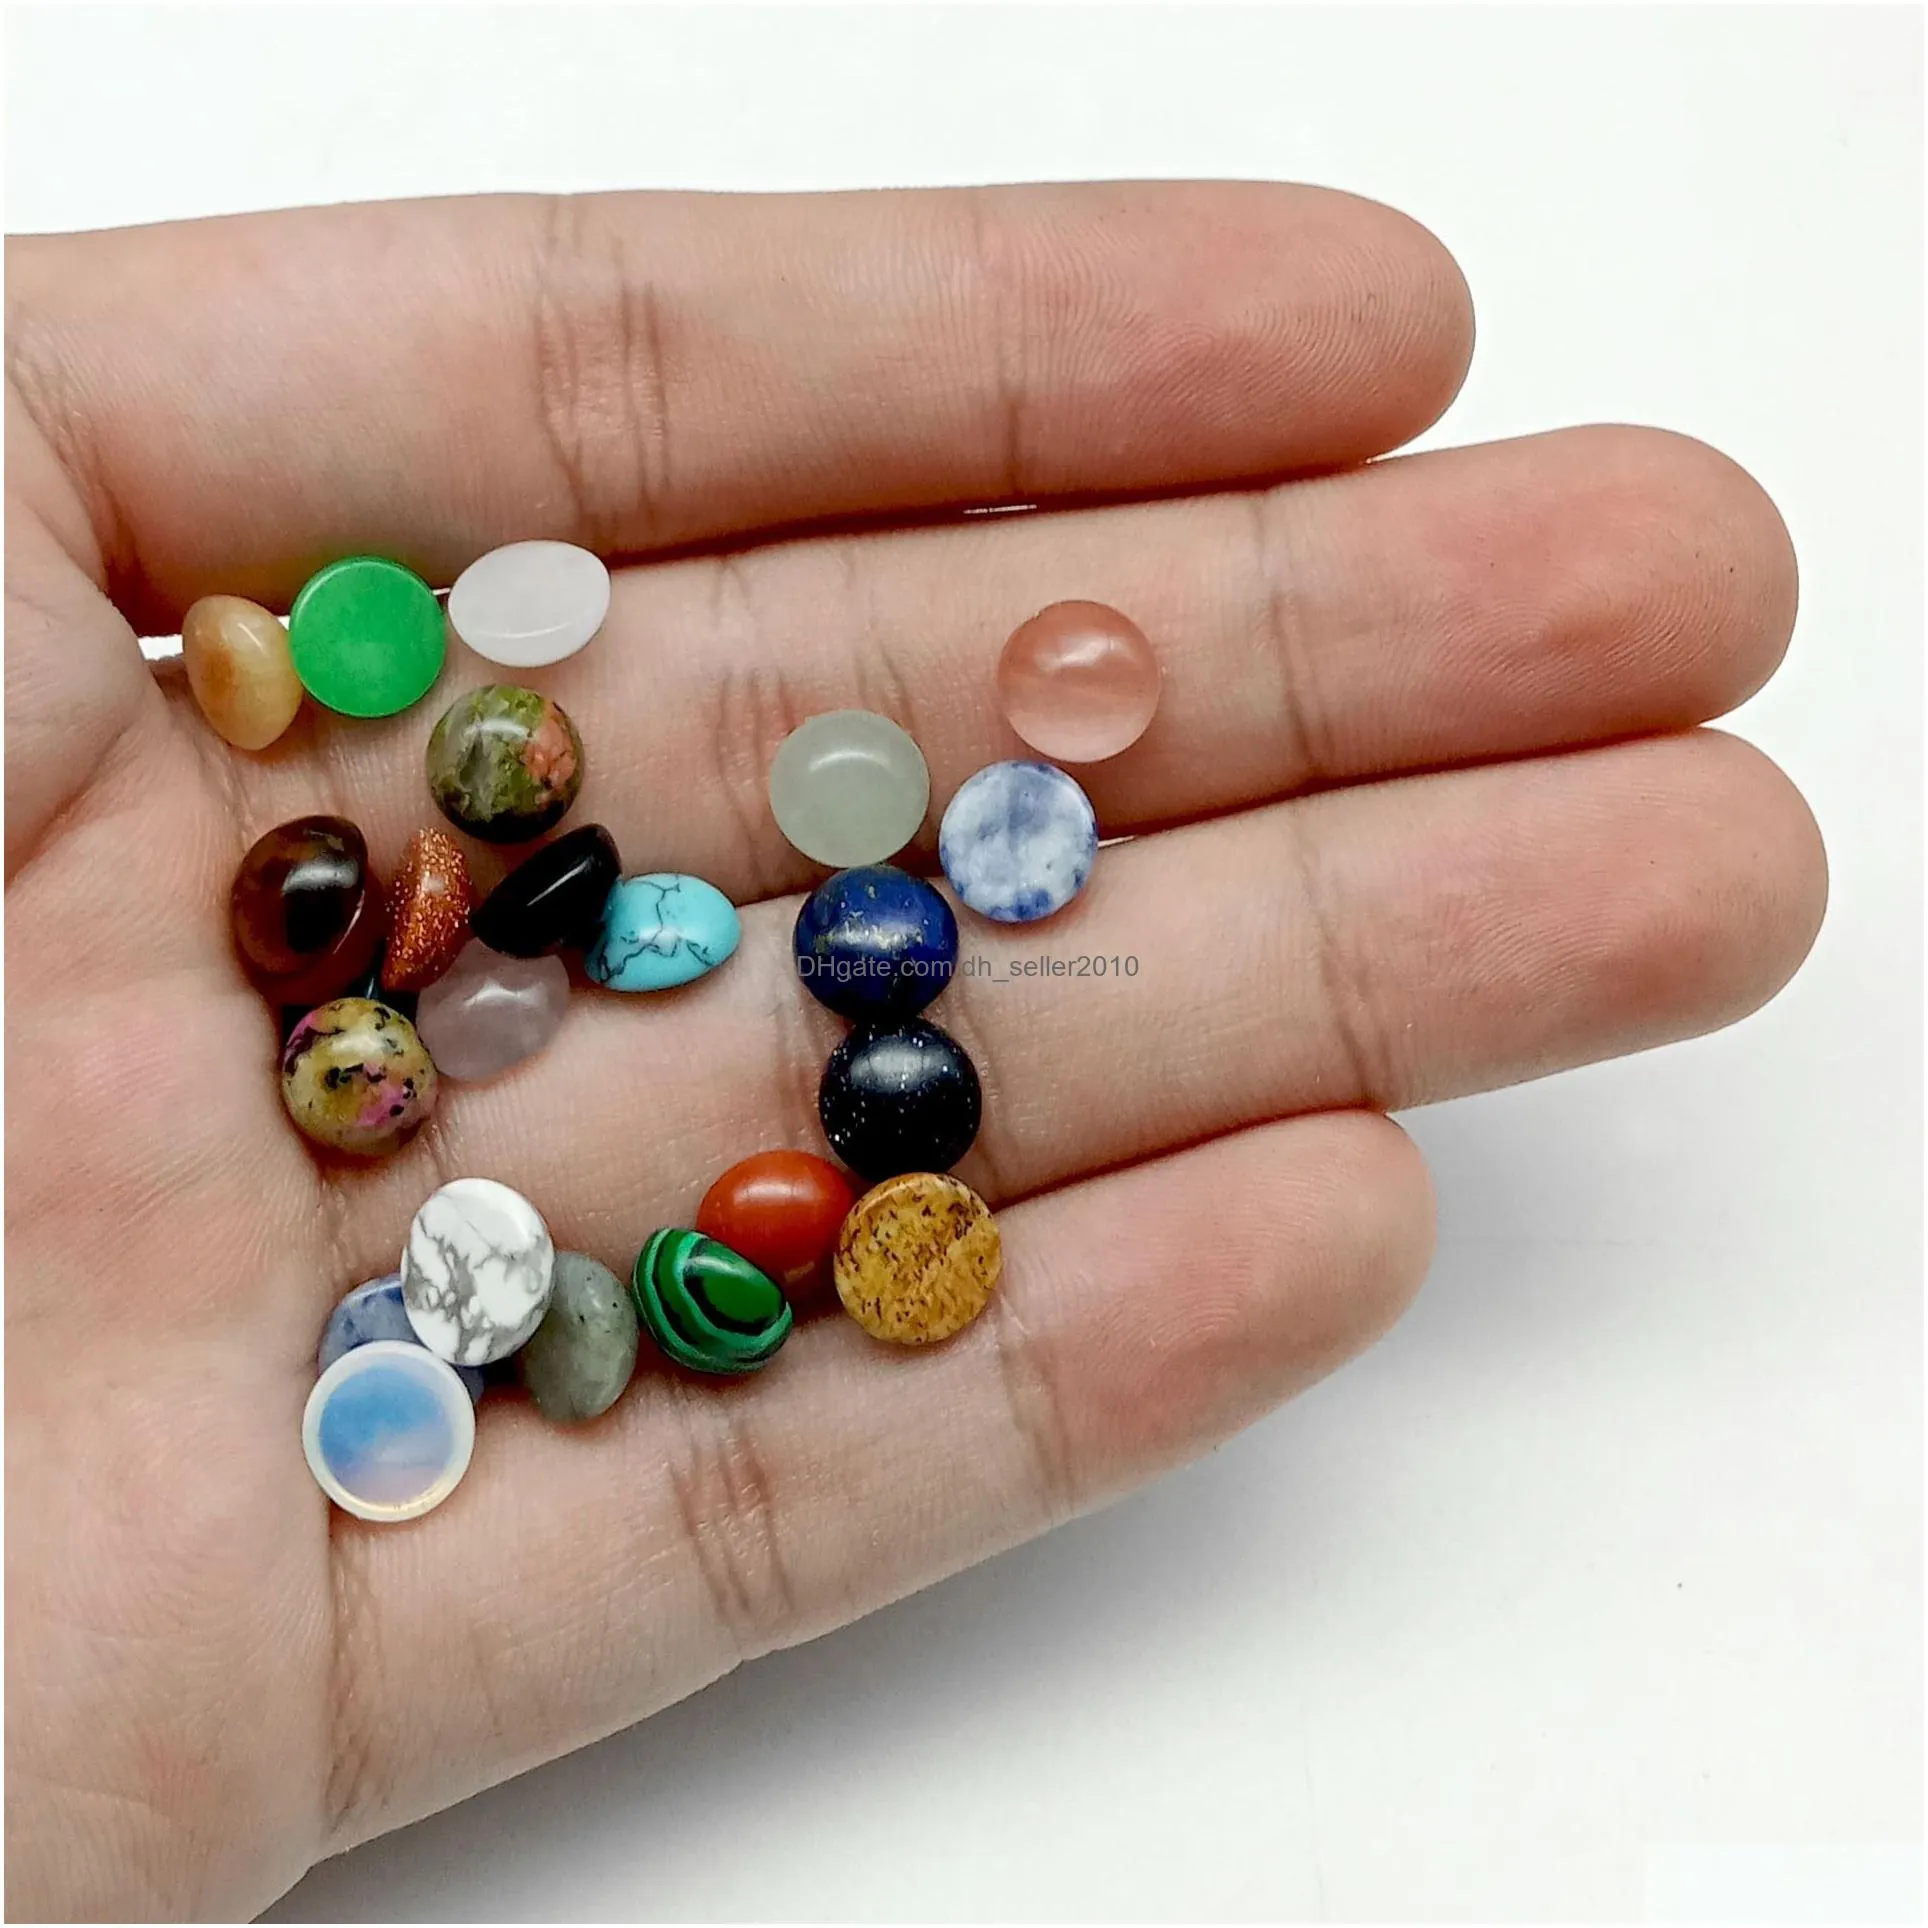 4/6/8/1012/14mm gemstone cabochons natural synthetic stone beads aquamarine cabochons for earring necklace bracelet